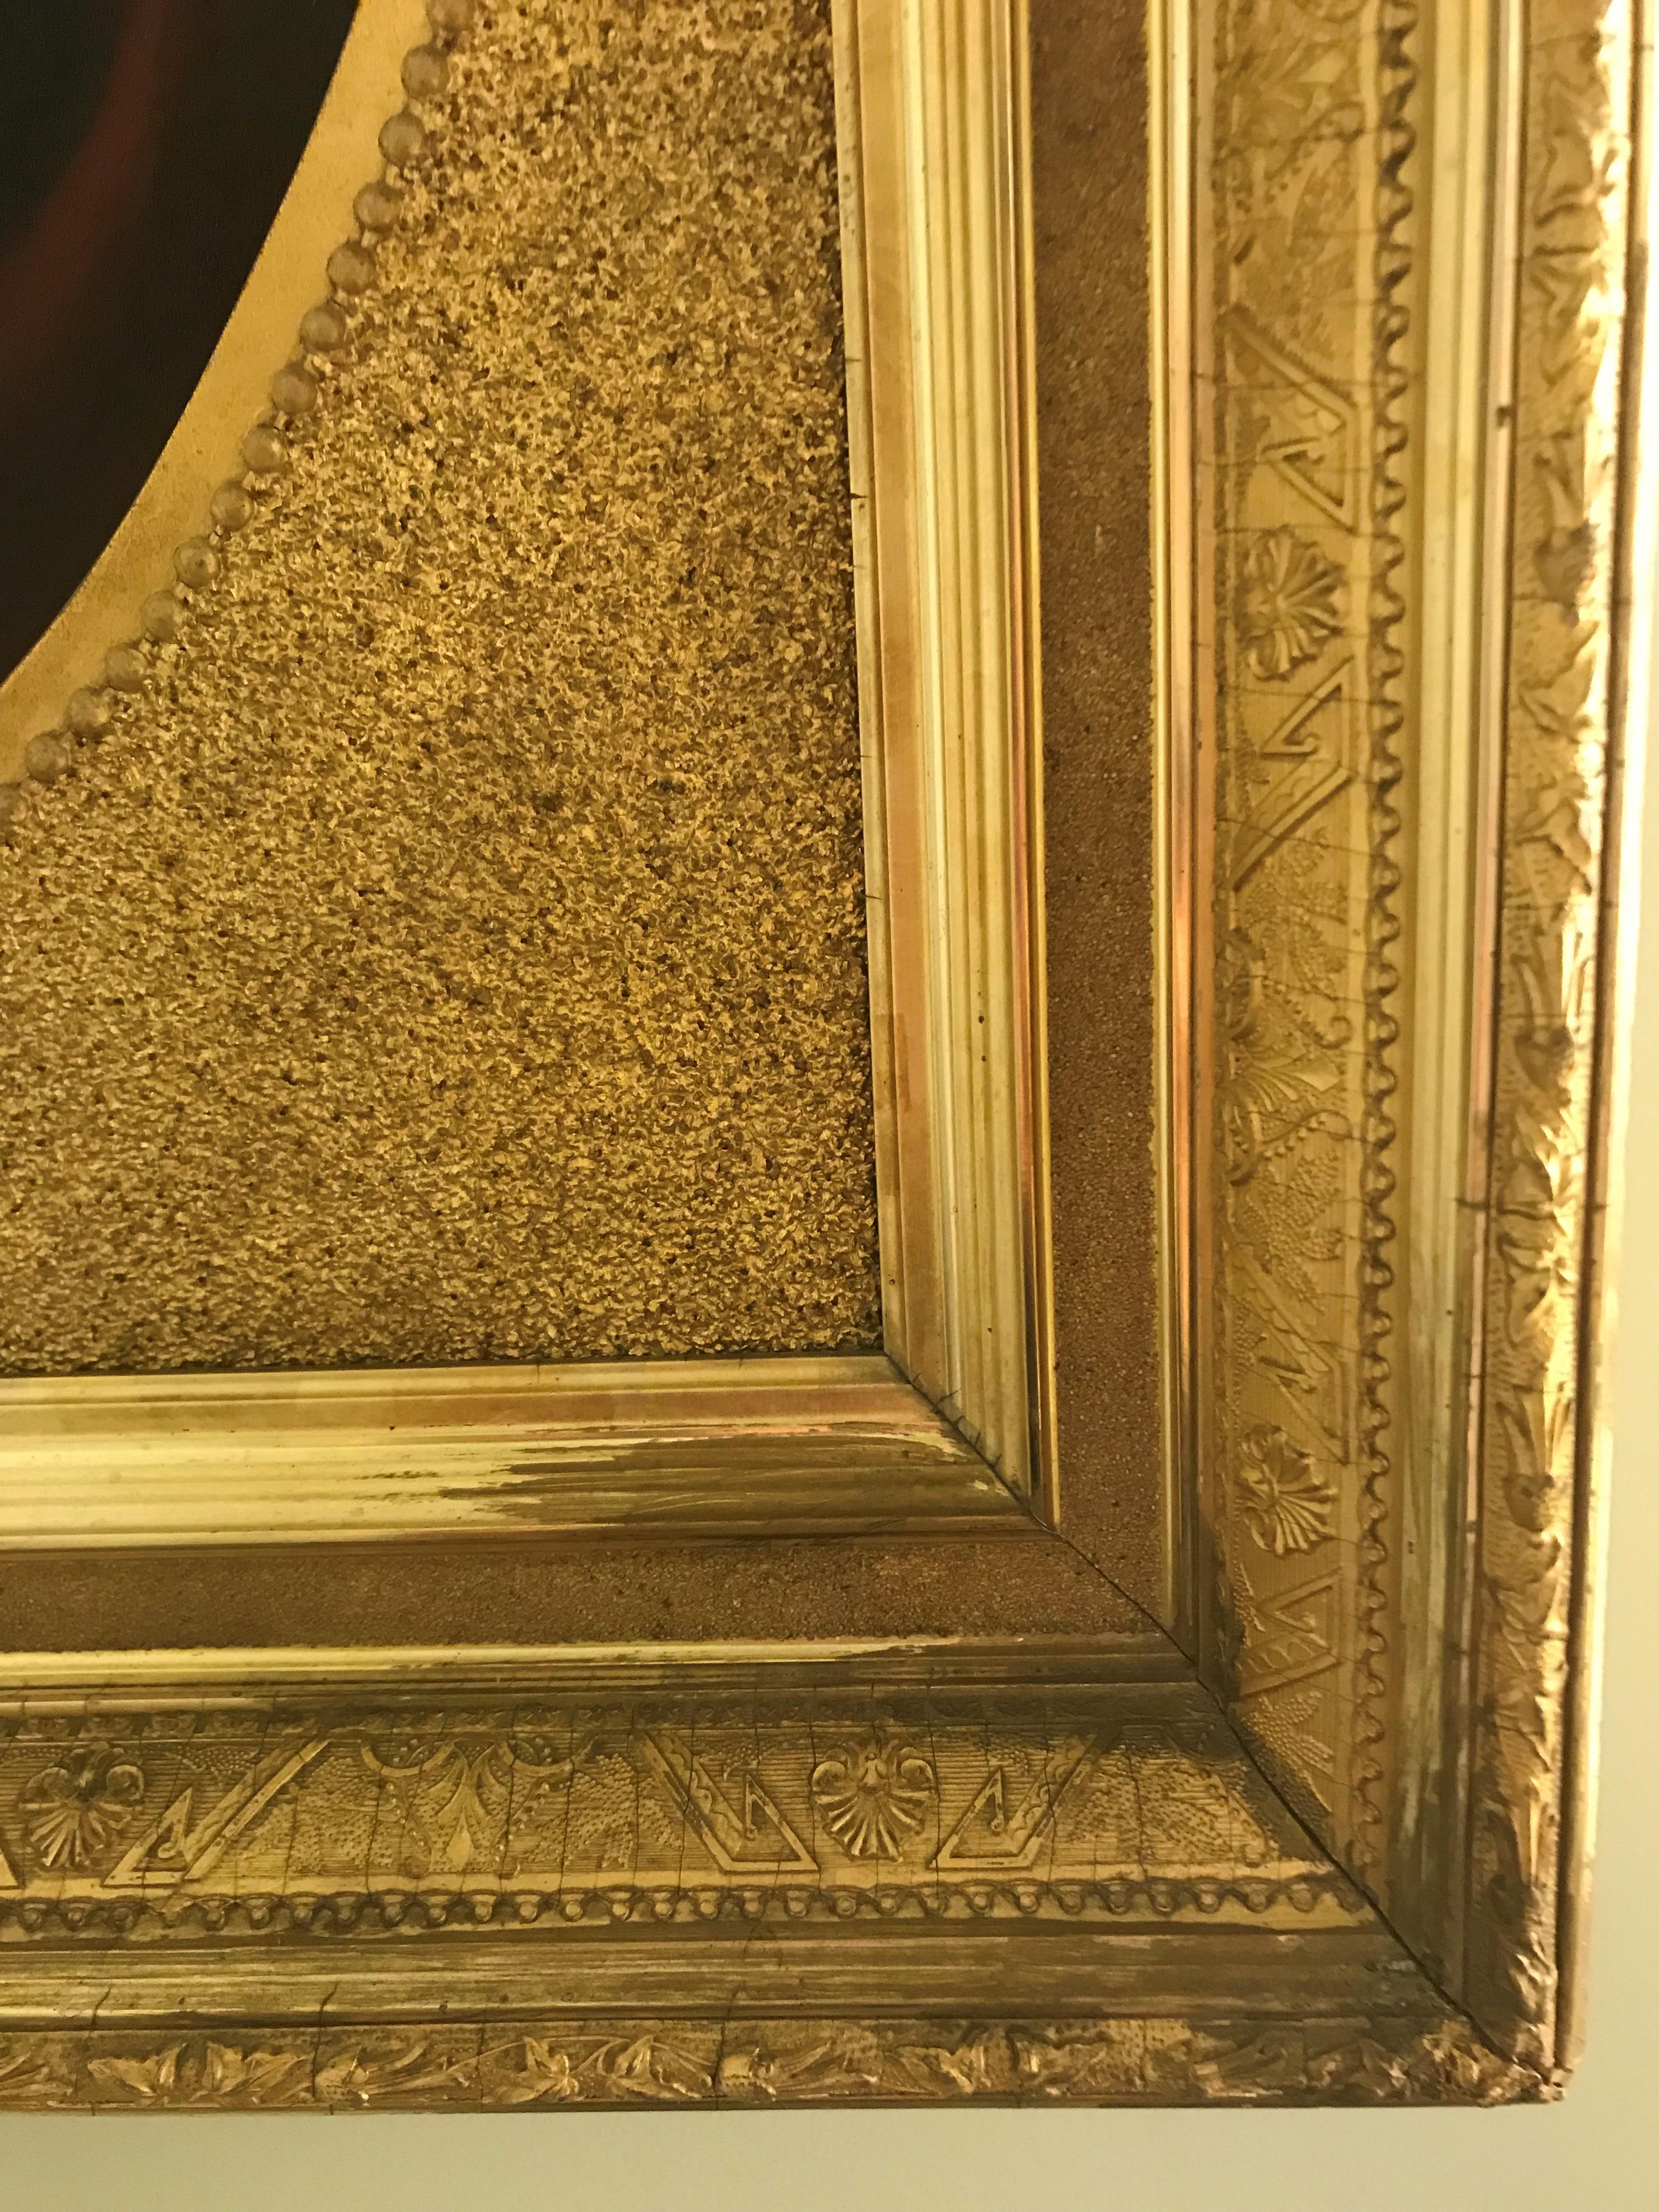 Original American portrait painting on canvas in ornate wood gilded frame. Painted in the Berkshires area of Massachusetts by L.H. Keeley in 1862. Video attached shows signature and date on back. Overall measurements are 32.25